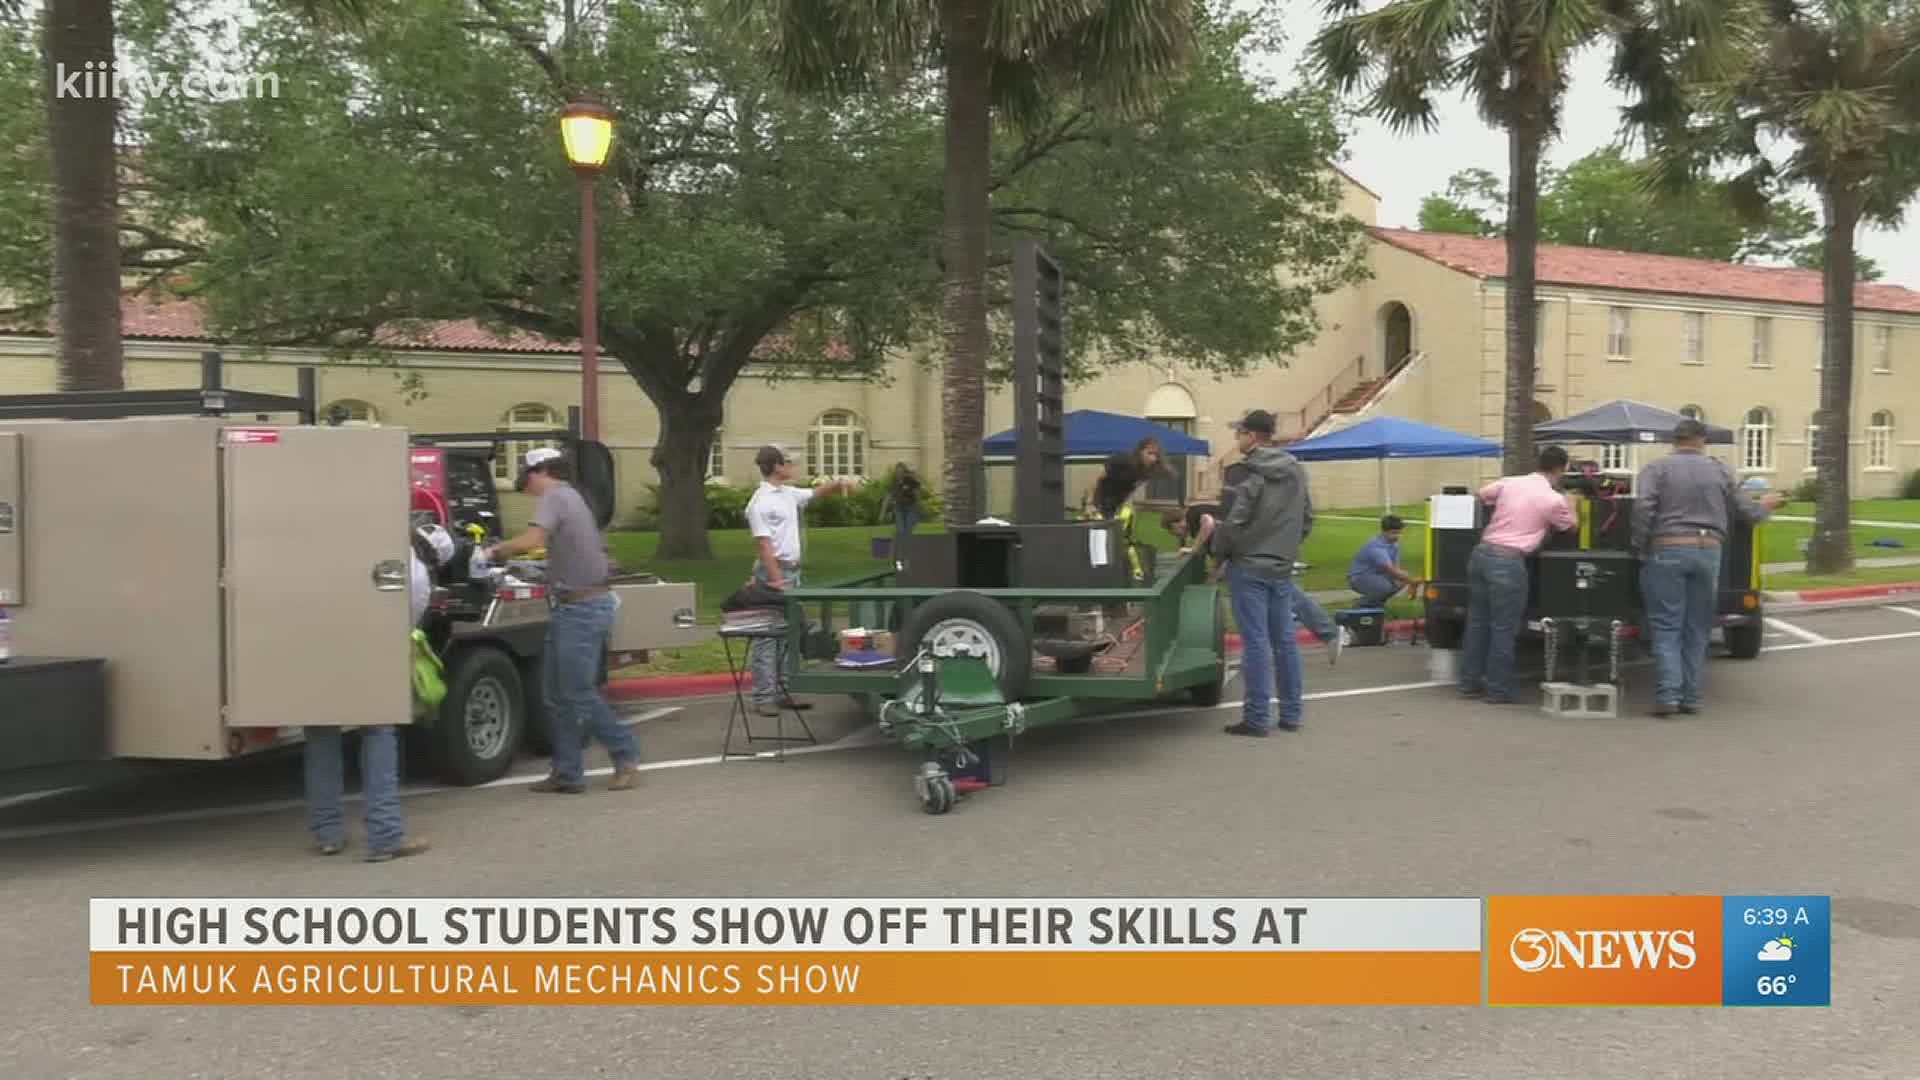 The show featured 80 creations along University Boulevard, with around 220 students taking part.